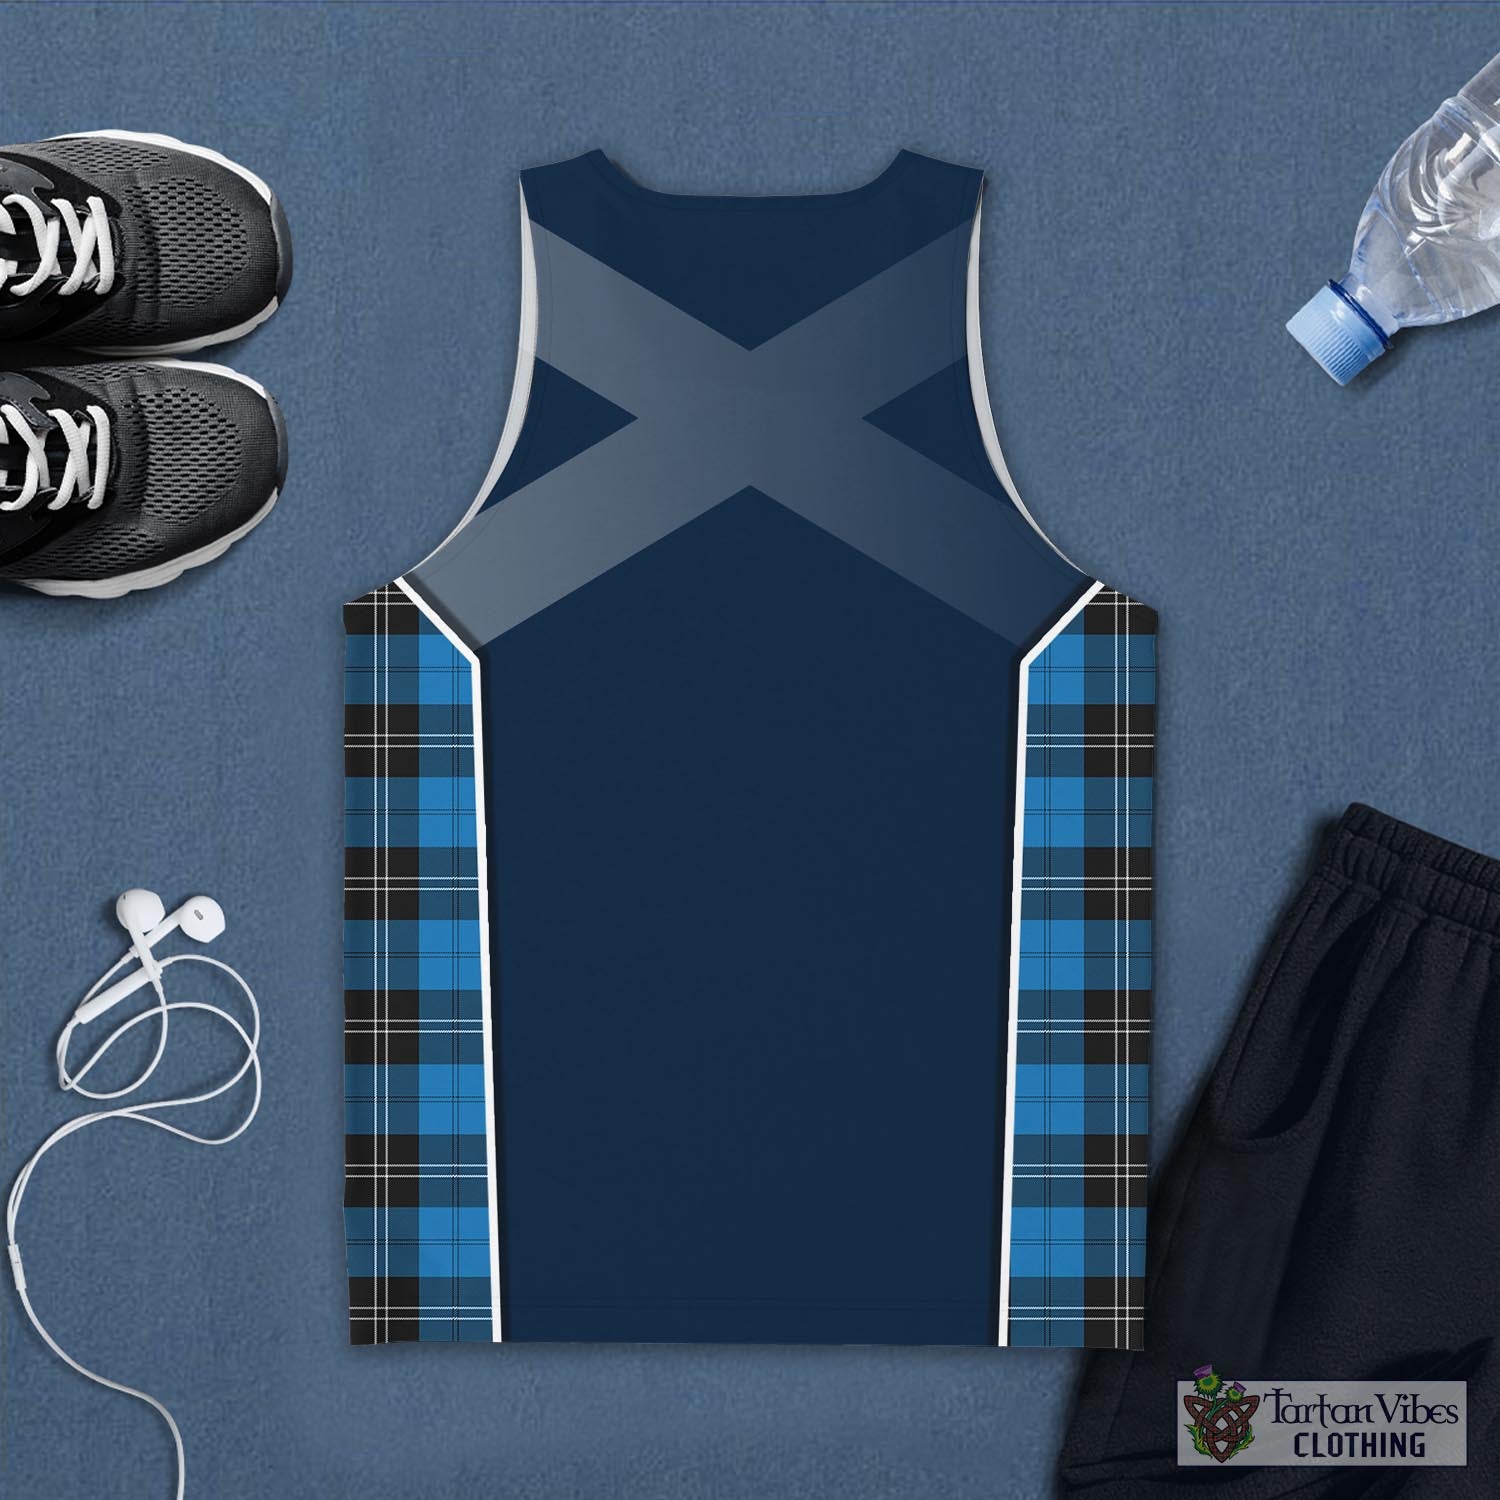 Tartan Vibes Clothing Ramsay Blue Ancient Tartan Men's Tanks Top with Family Crest and Scottish Thistle Vibes Sport Style